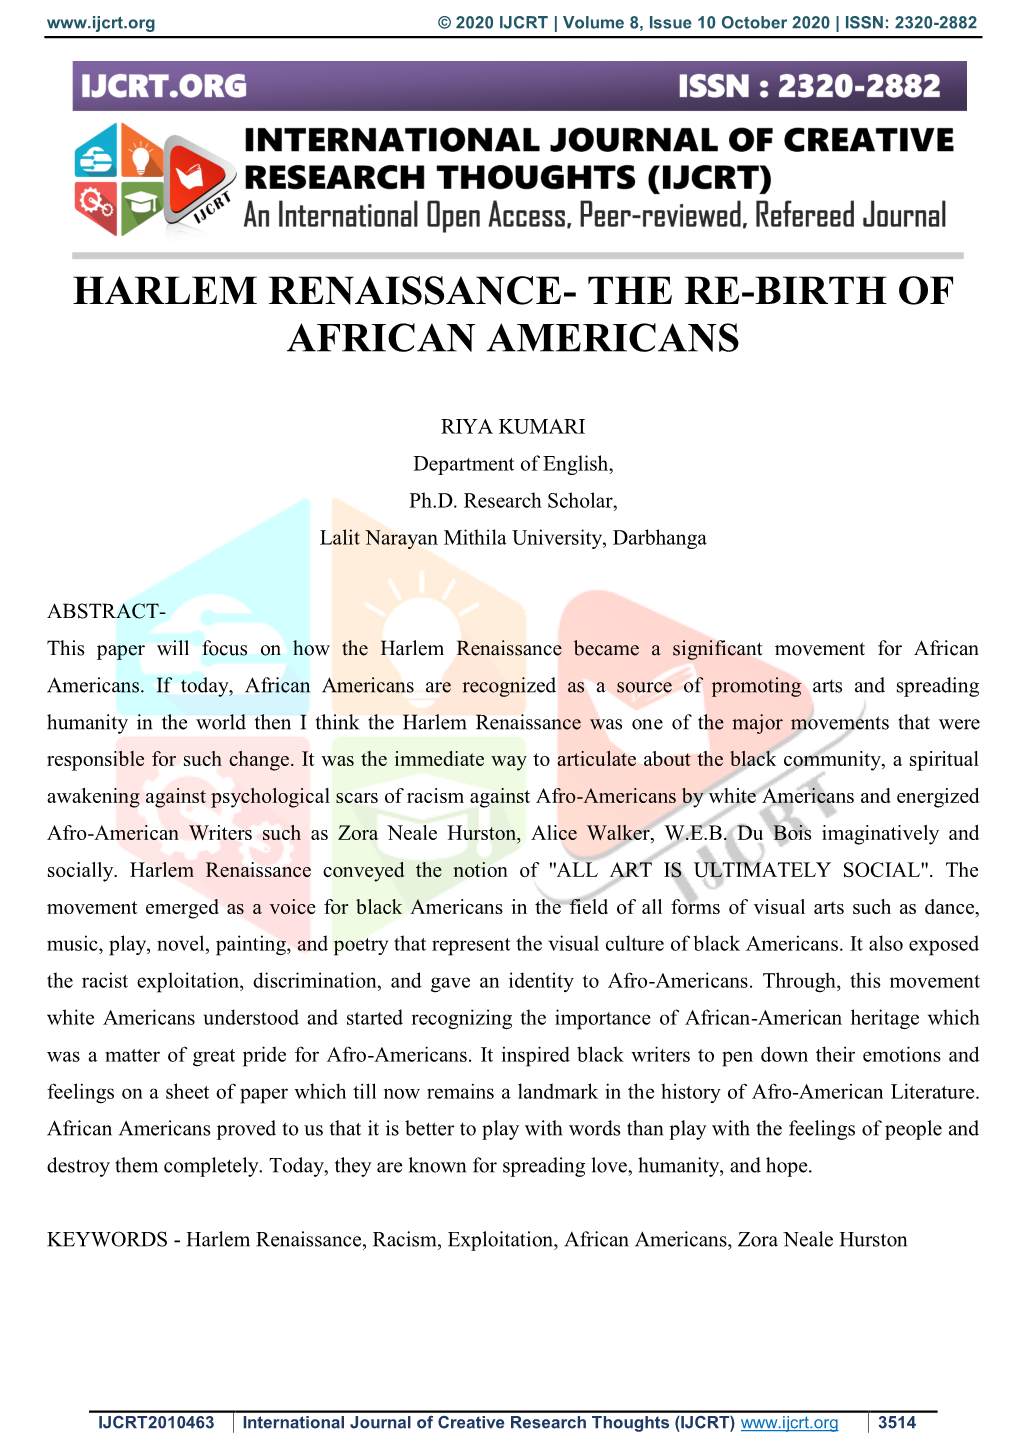 Harlem Renaissance- the Re-Birth of African Americans